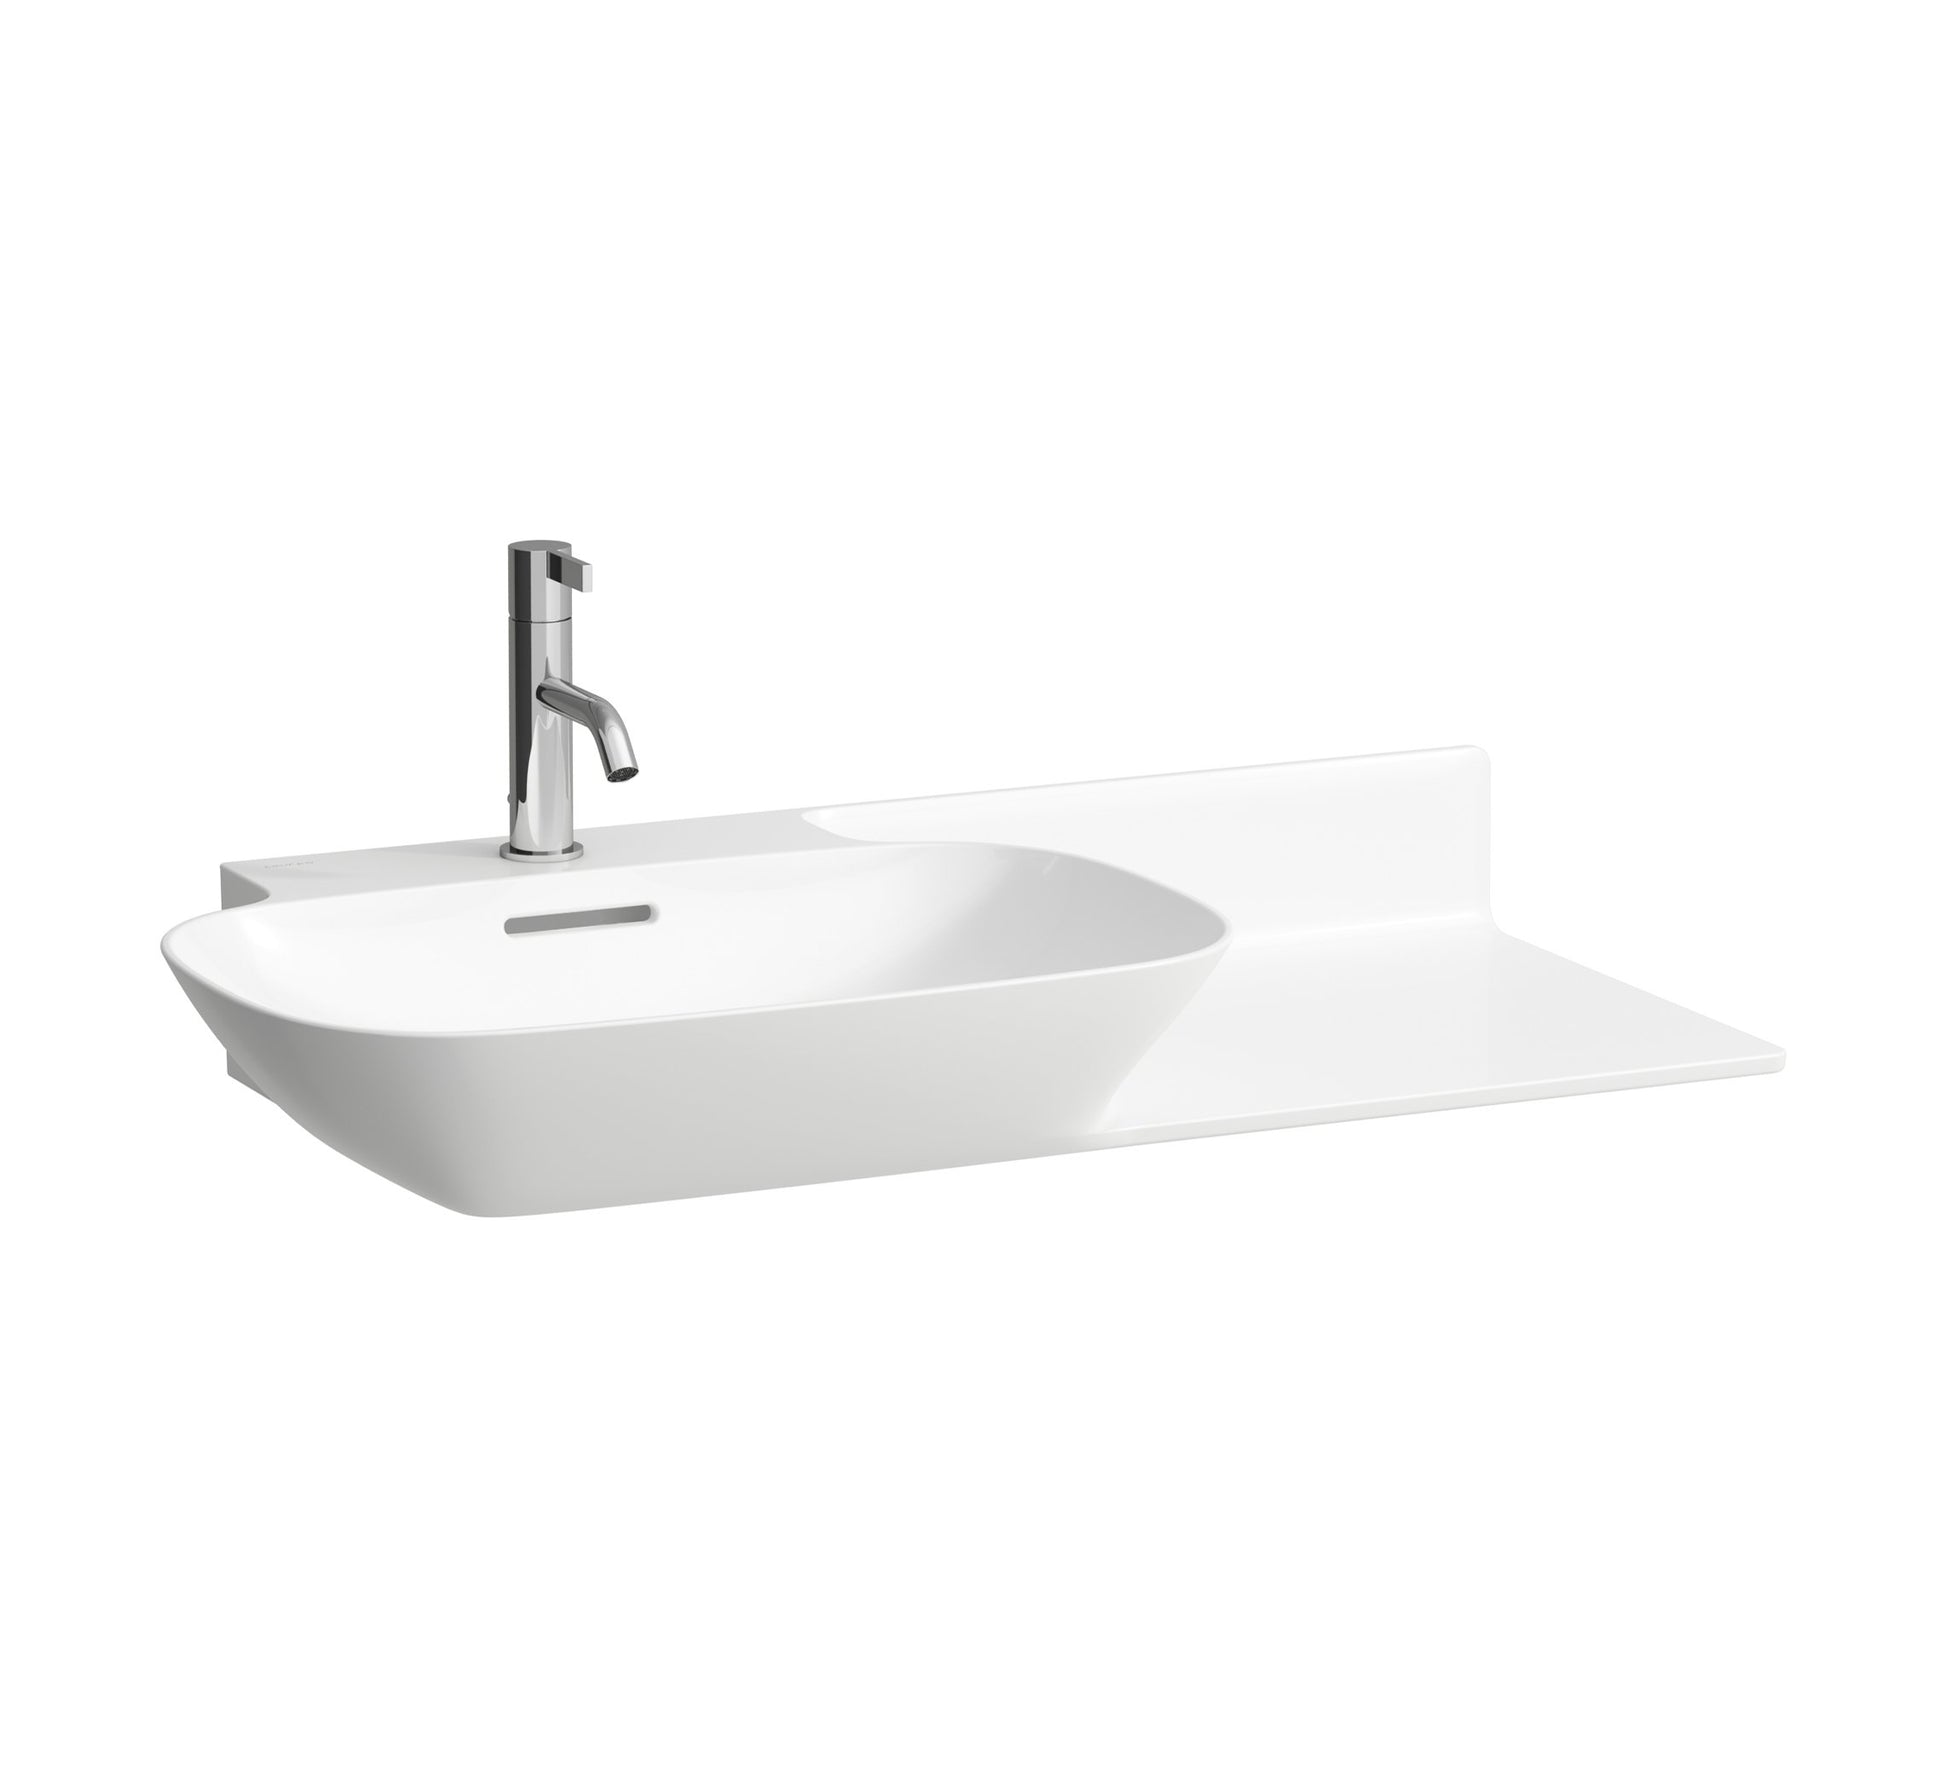 LAUFEN INO COUNTERTOP WASHBASIN SHELF RIGHT, WITH ONE TAPHOLE TAPHOLE, WITH OVERFLOW SIZE: 90 X 45 CM WHITE - 8.1330.2.000.104.1 + SCREWS - 8.9988.2.000.000.1 - Tadmur Trading